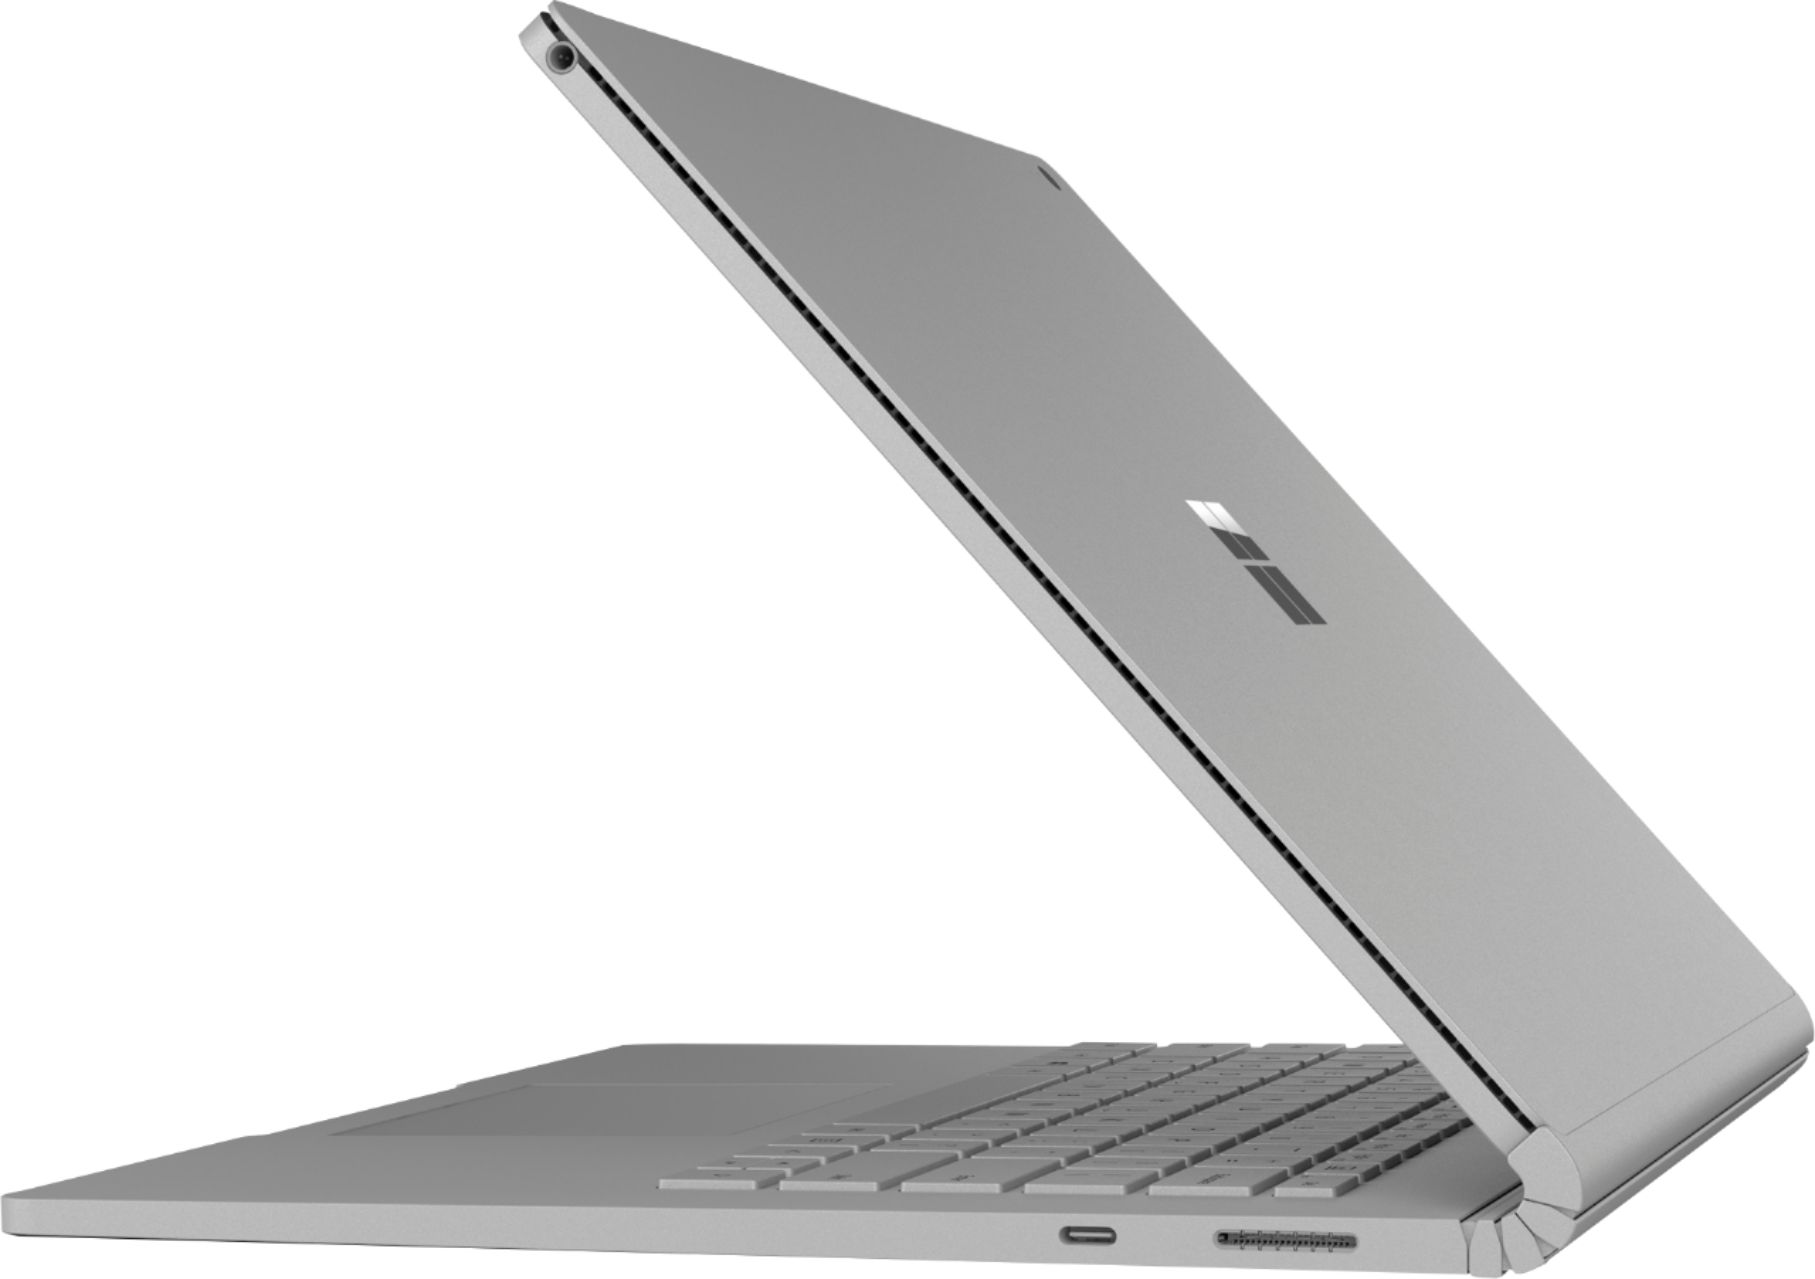 Left View: Microsoft - Geek Squad Certified Refurbished Surface Laptop 3 13.5" Touch-Screen - Intel Core i7 - 16GB Memory - 512GB SSD